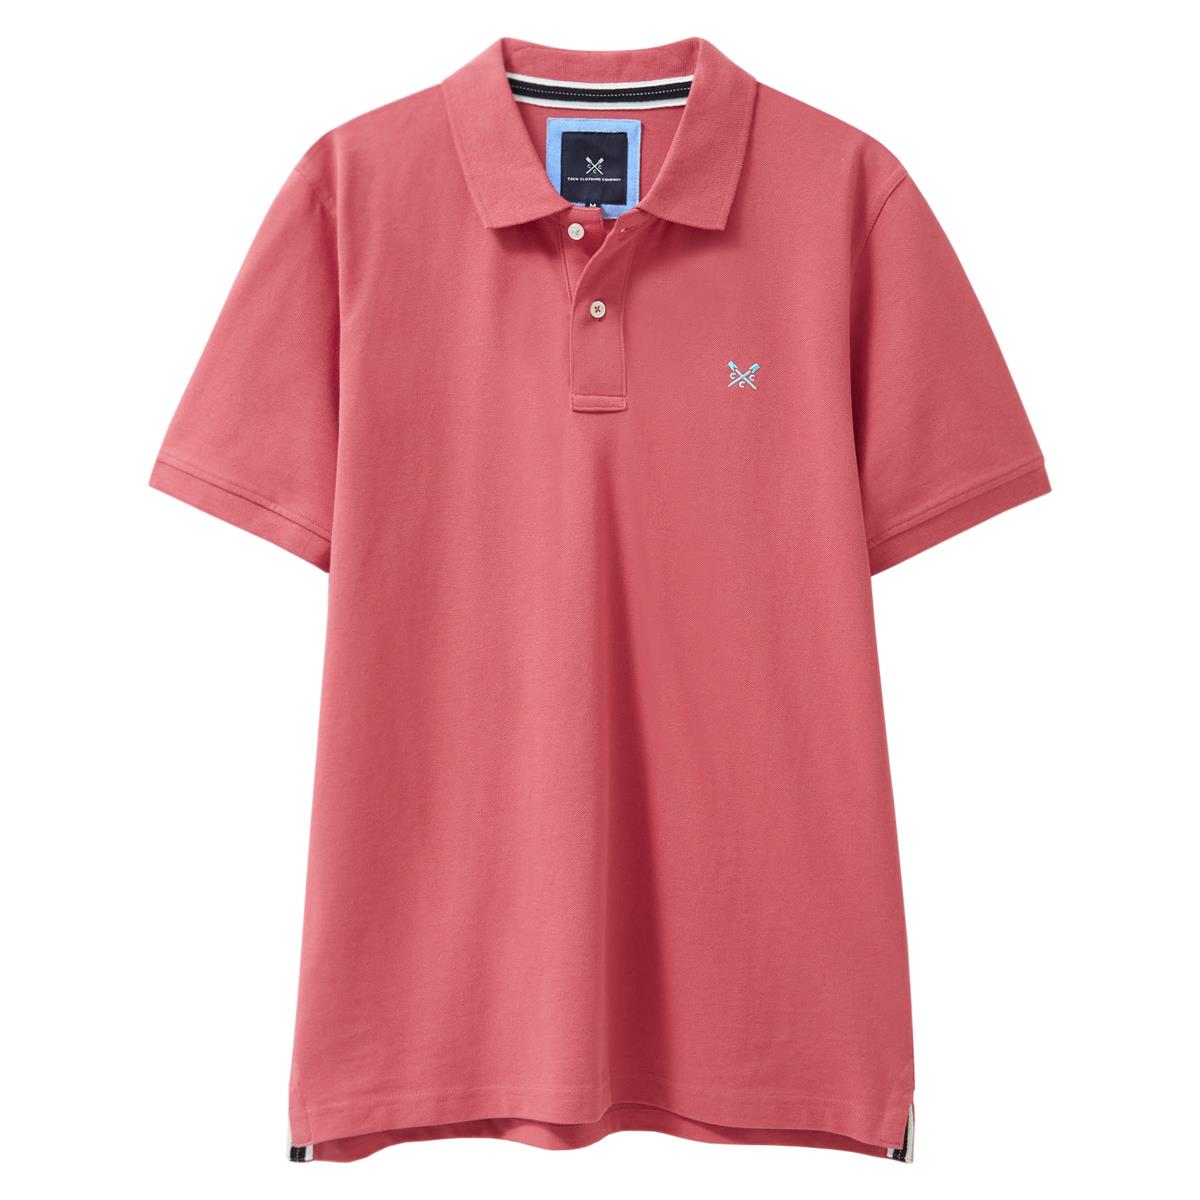 Is the crew polo shirt pre-washed?